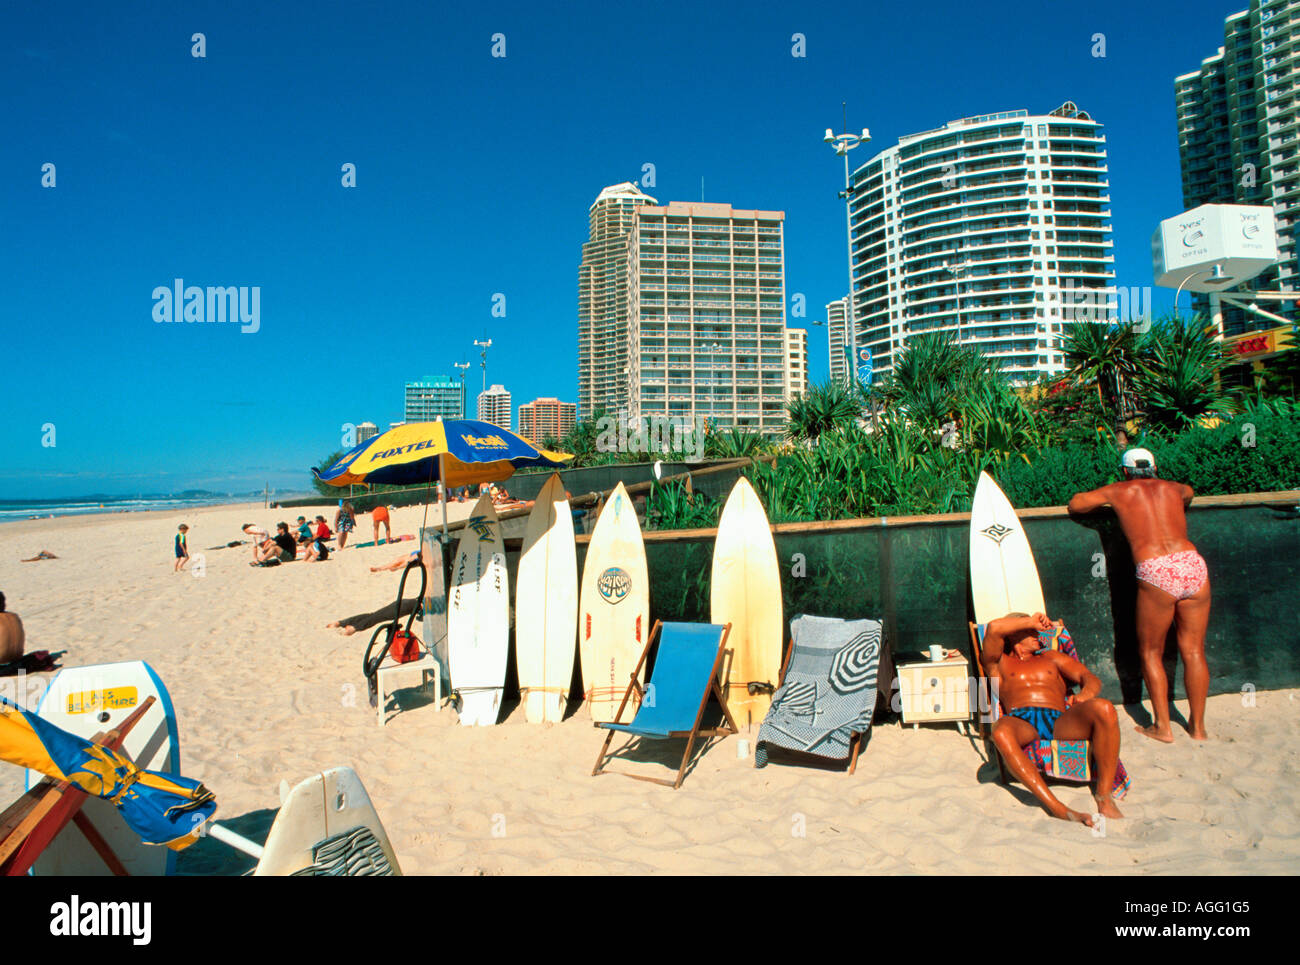 surfboards and surfers, Surfers Paradise, Queensland Gold Coast, Australia Stock Photo